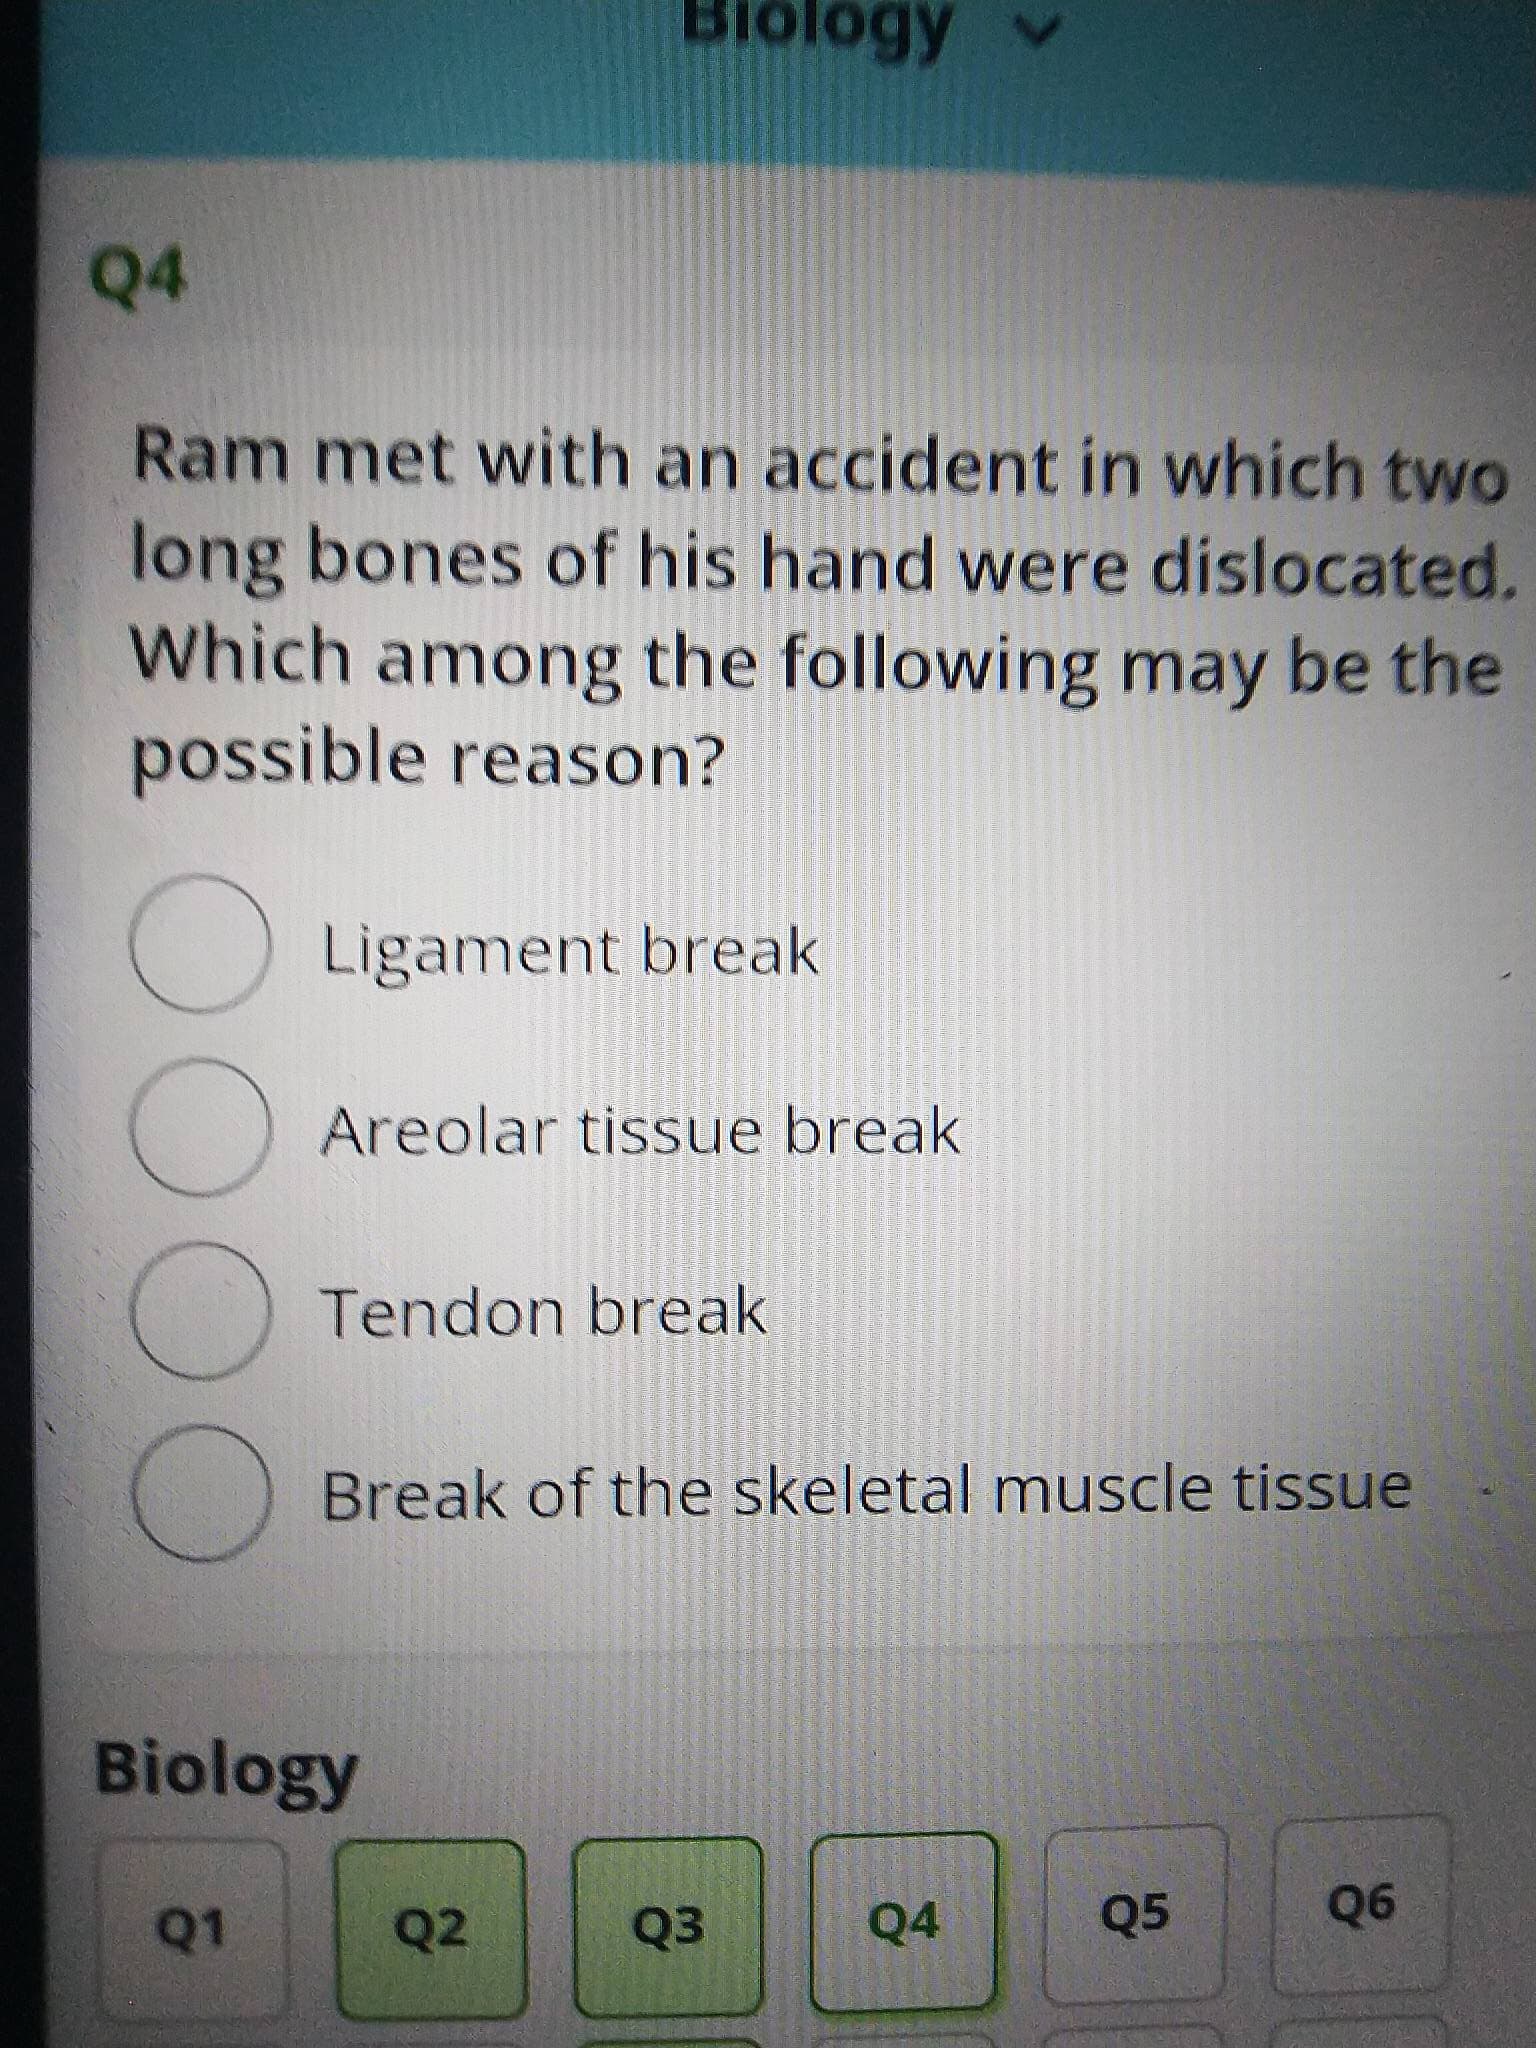 99
0OO
10
Q4
Ram met with an accident in which two
long bones of his hand were dislocated.
Which among the following may be the
possible reason?
Ligament break
Areolar tissue break
Tendon break
Break of the skeletal muscle tissue
Biology
Q2
Q3
Q4
Q5
